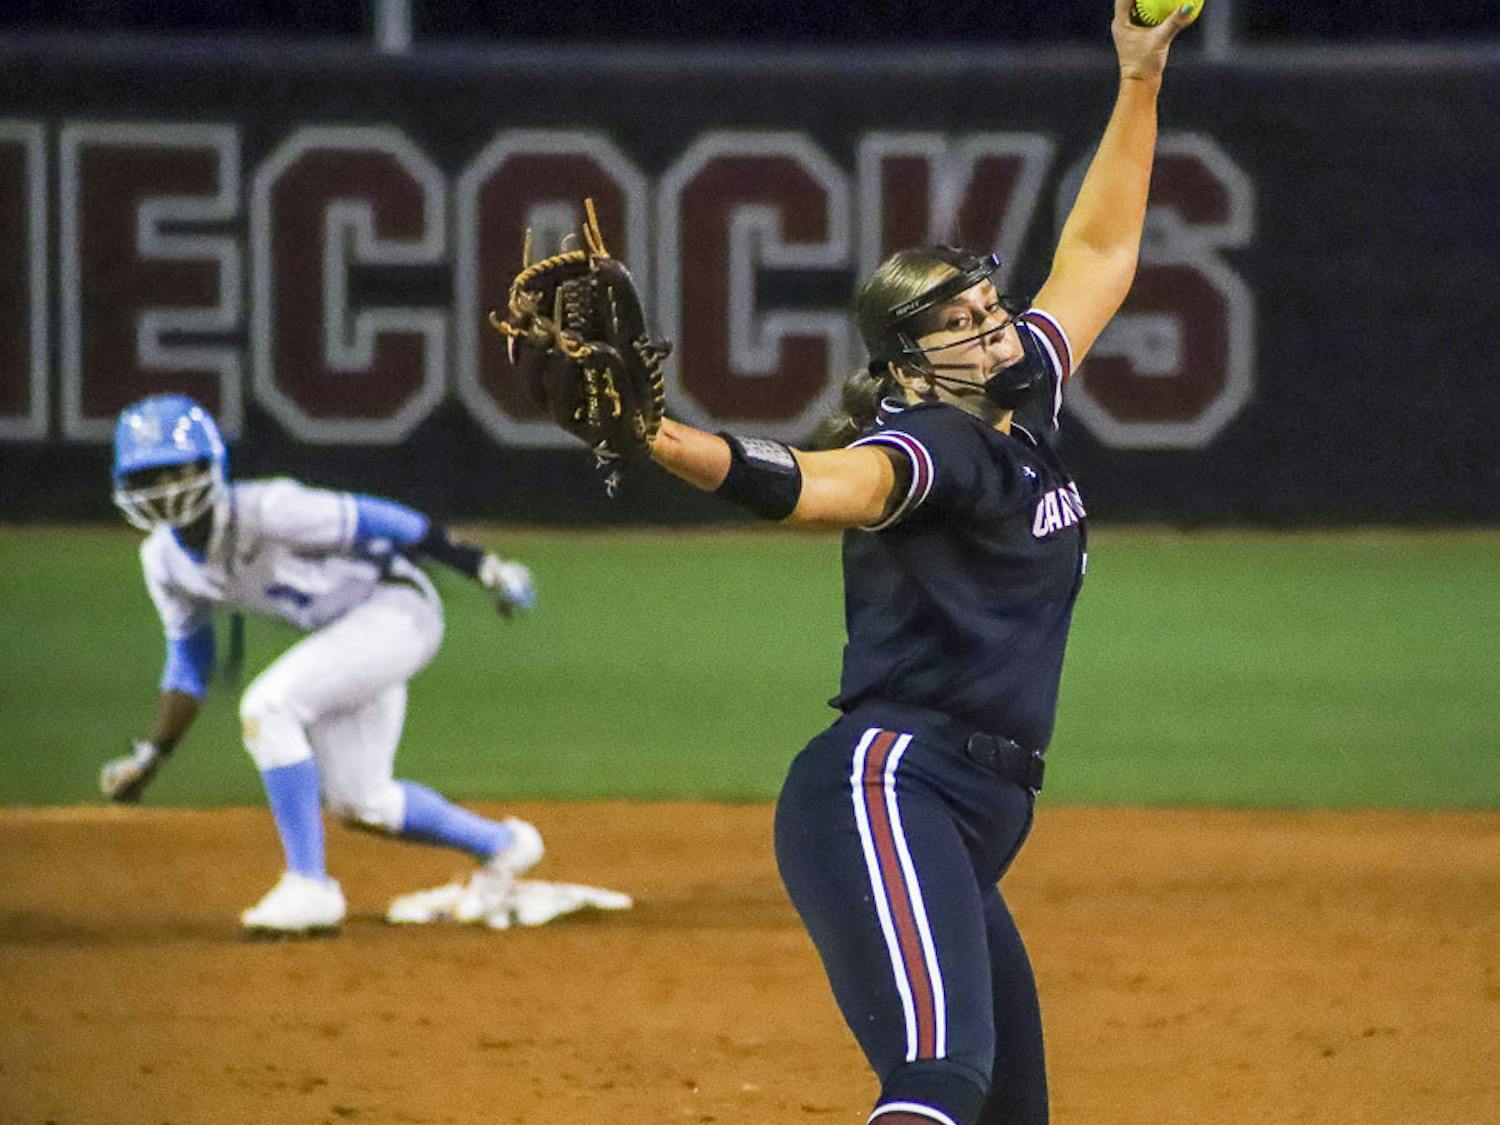 Senior pitcher Bailey Betenbaugh throws a pitch during the Gamecock's match against North Carolina at Beckham Field on March 1, 2023. South Carolina ended the game early with a 9-1 win over the Tar Heels.